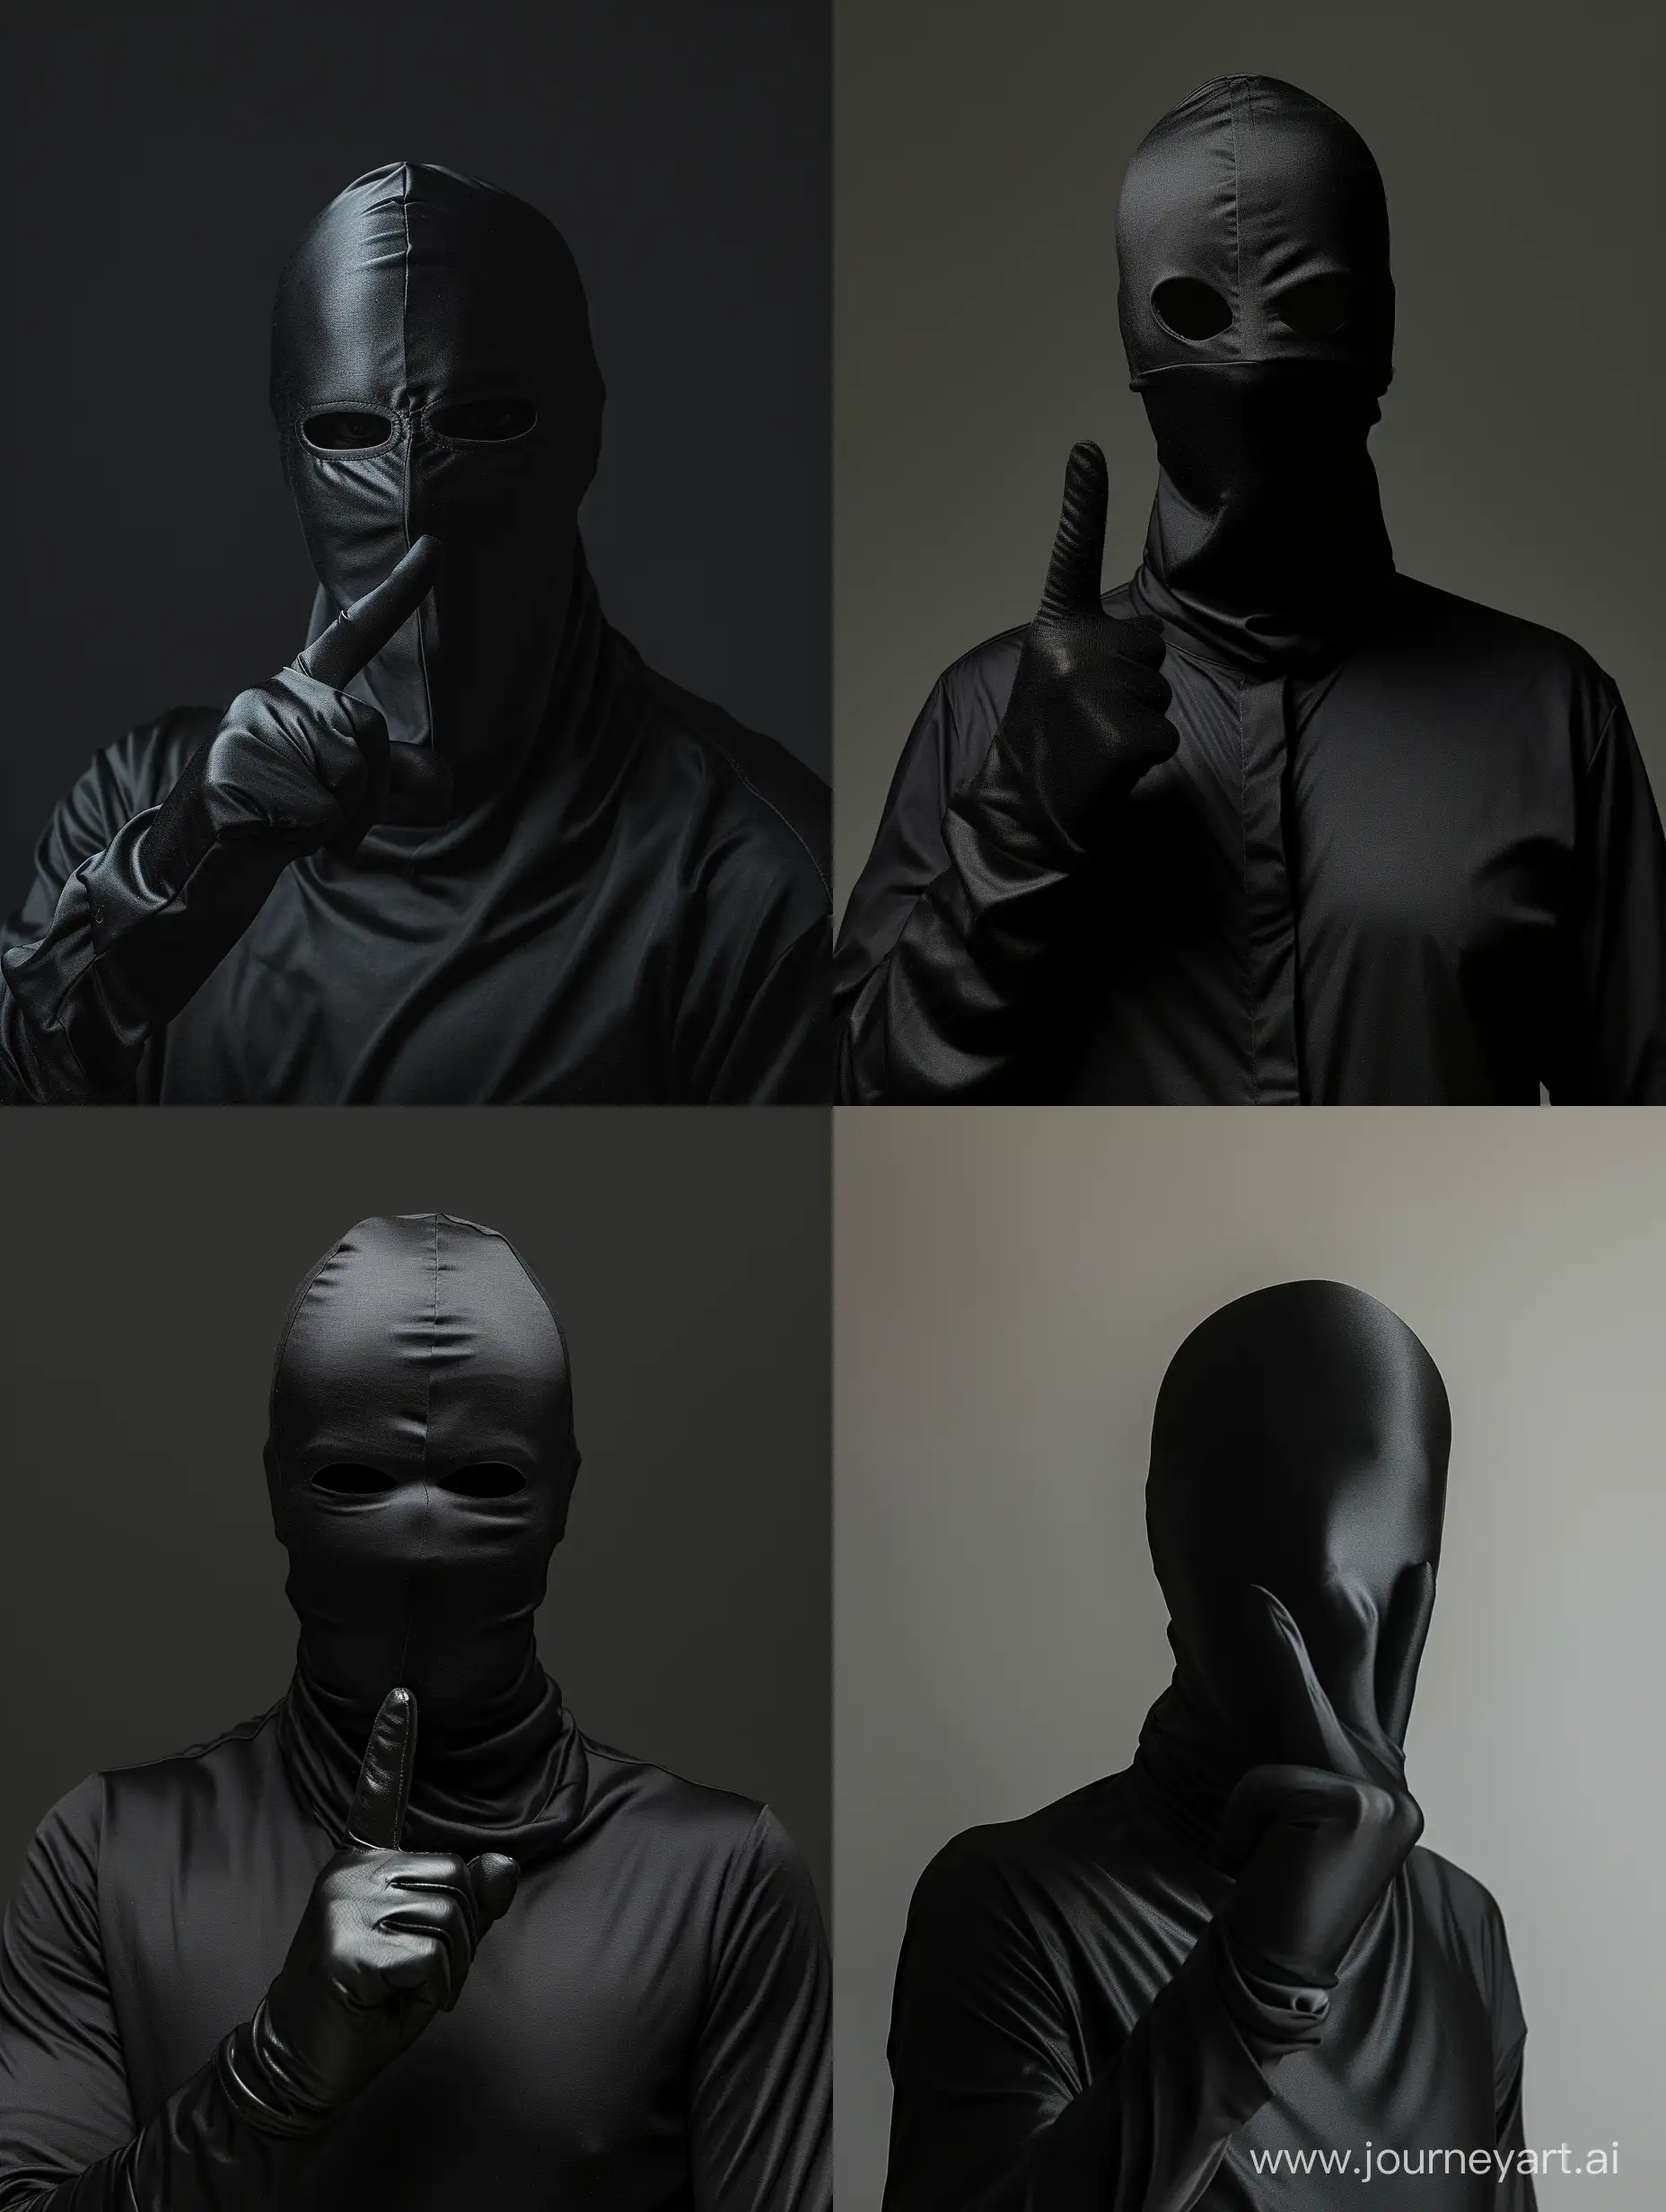 Mysterious-Incognito-Man-in-Power-Pose